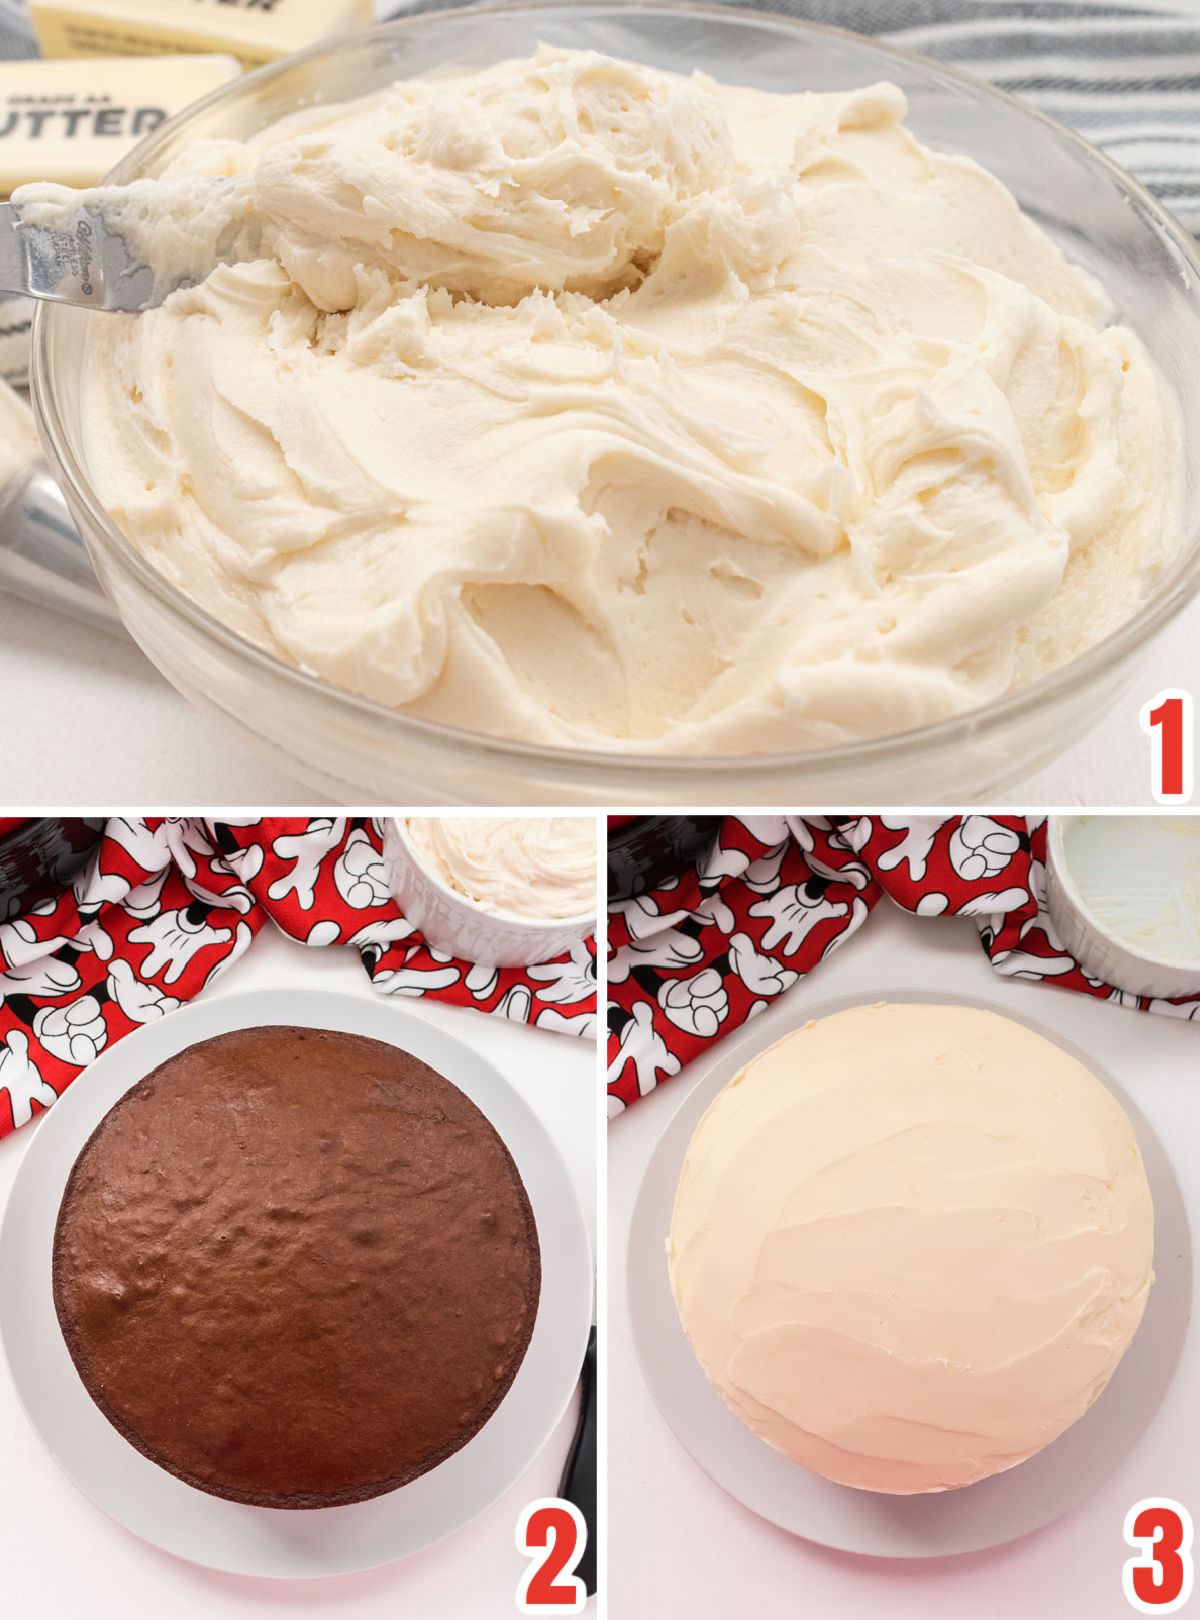 Collage image showing the steps for preparing to decorate the cake including making the frosting, making the cake and frosting the cake.